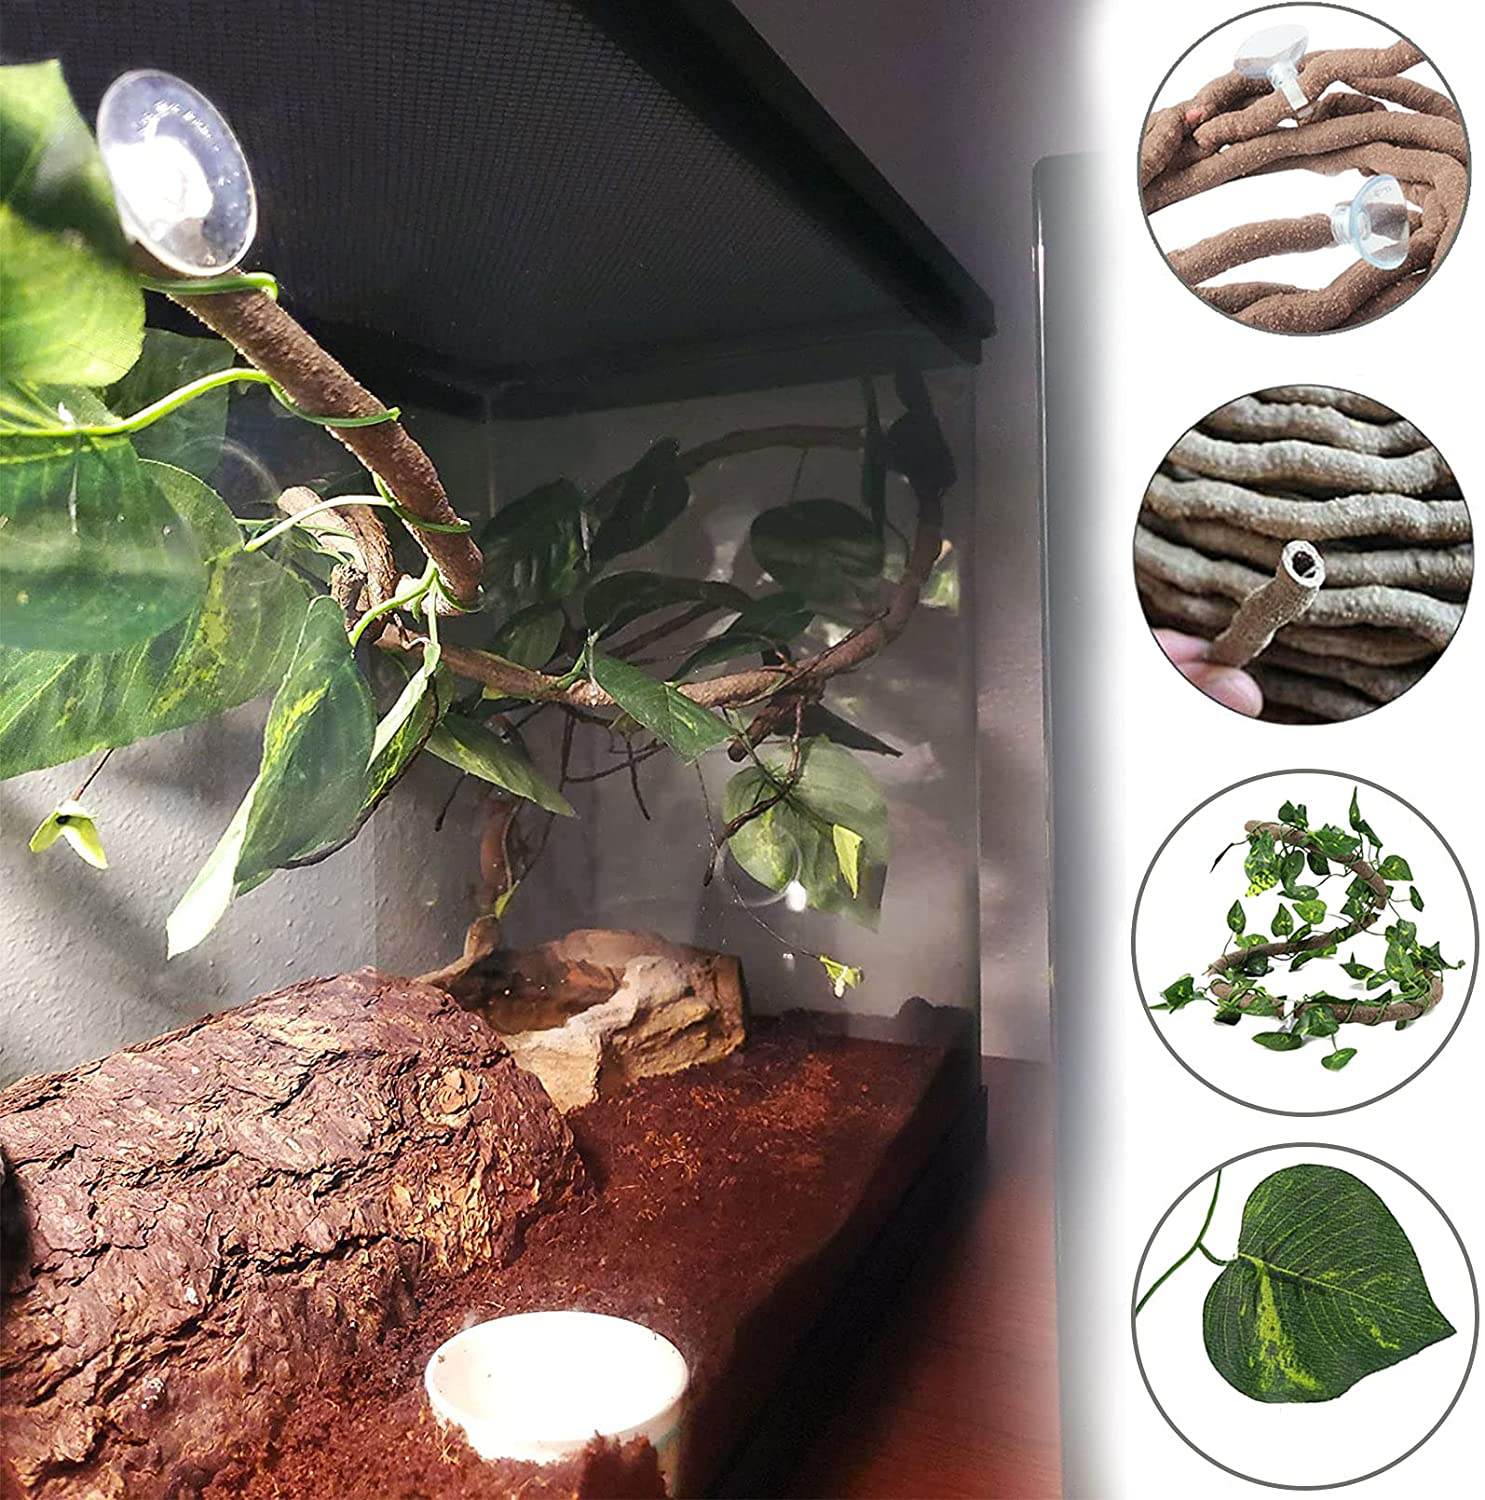 Tfwadmx Large Reptile Hideout Cave Lizard Resin Hollow Tree Trunk Habitat Decoration Decaying Driftwood Hut Ornament Bark Bend Tank Decor Terrarium Accessories for Gecko,Chameleon and Hermit Crabs Animals & Pet Supplies > Pet Supplies > Reptile & Amphibian Supplies > Reptile & Amphibian Habitats Tfwadmx   